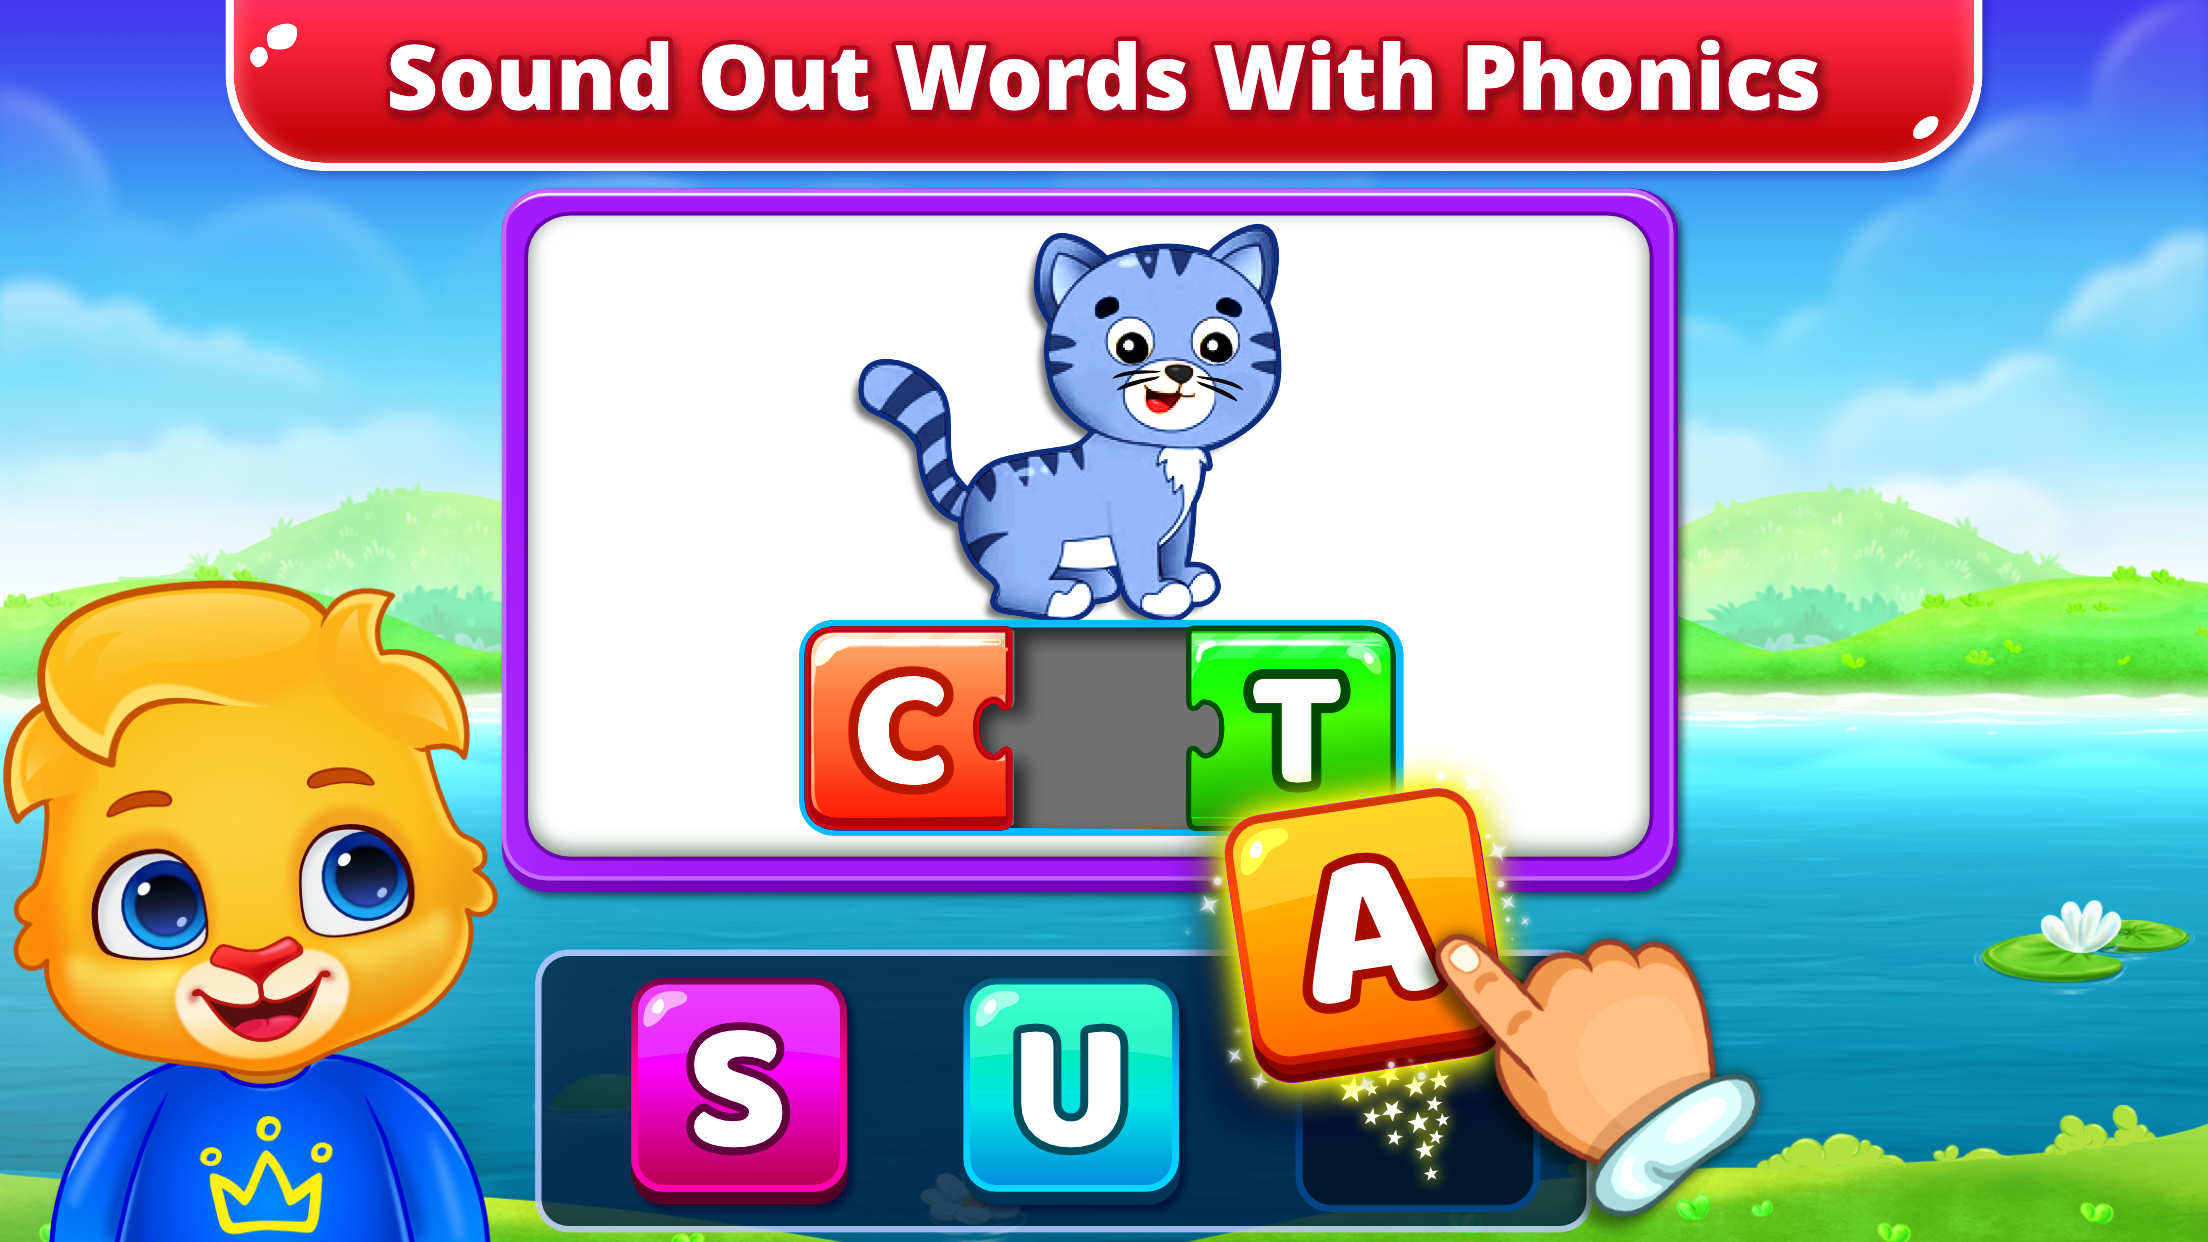 ABC Spelling - Spell  Android App